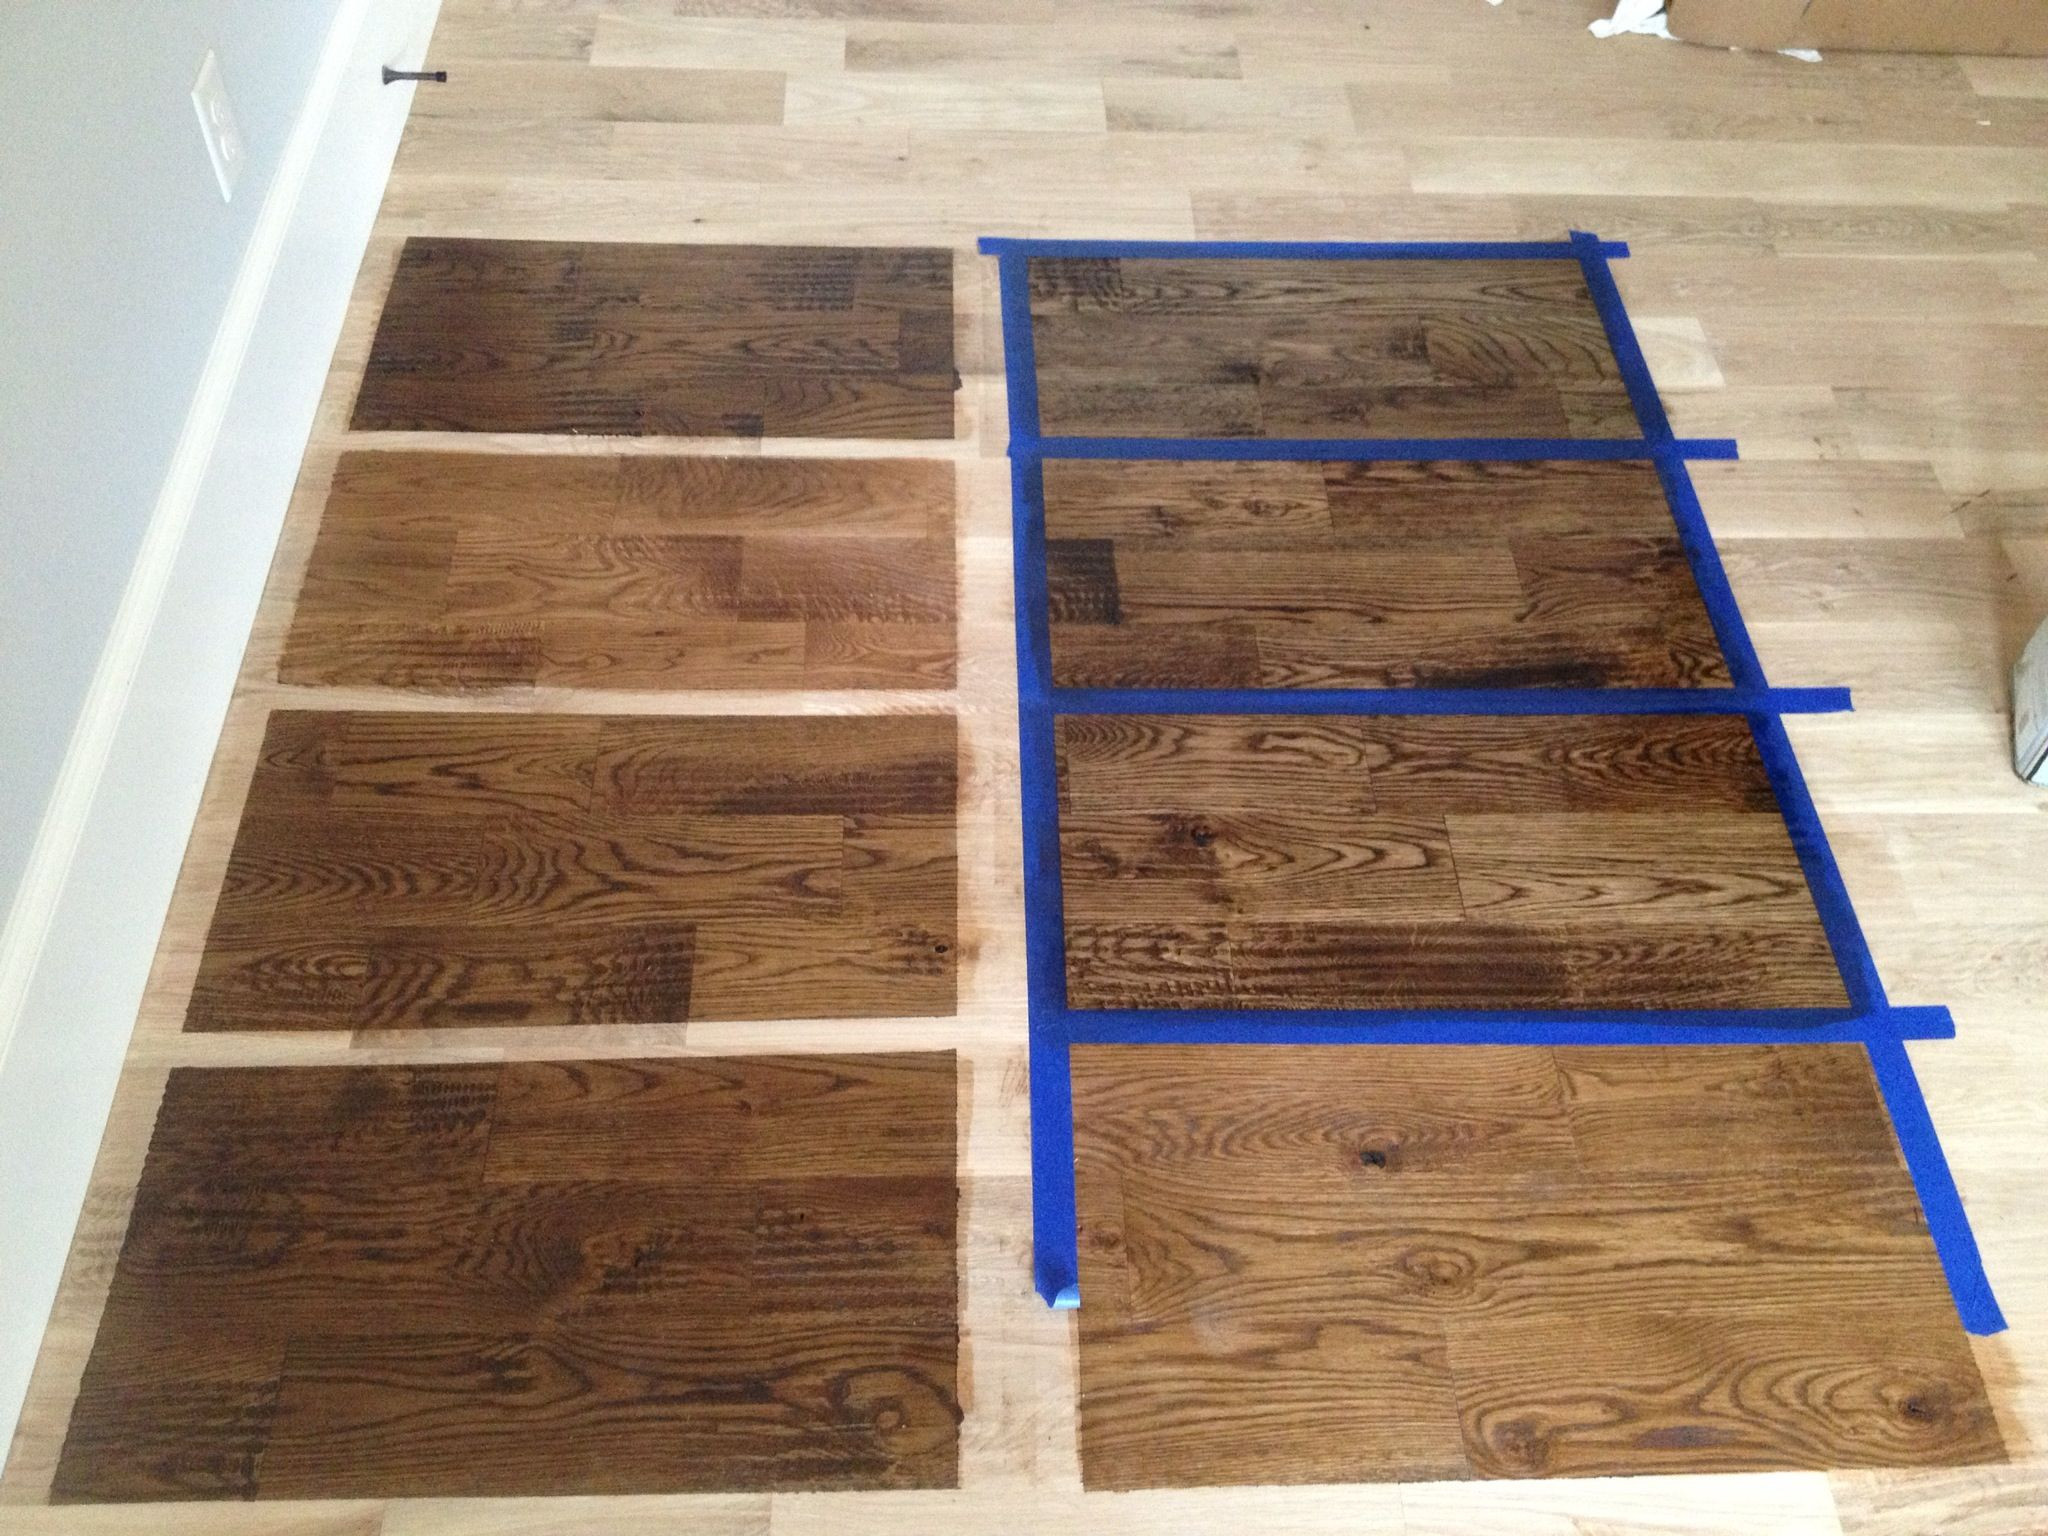 10 Awesome Hardwood Floor Stain Colors for White Oak 2024 free download hardwood floor stain colors for white oak of duraseal stains on white oak left column from the top spicy brown pertaining to duraseal stains on white oak left column from the top spicy brown